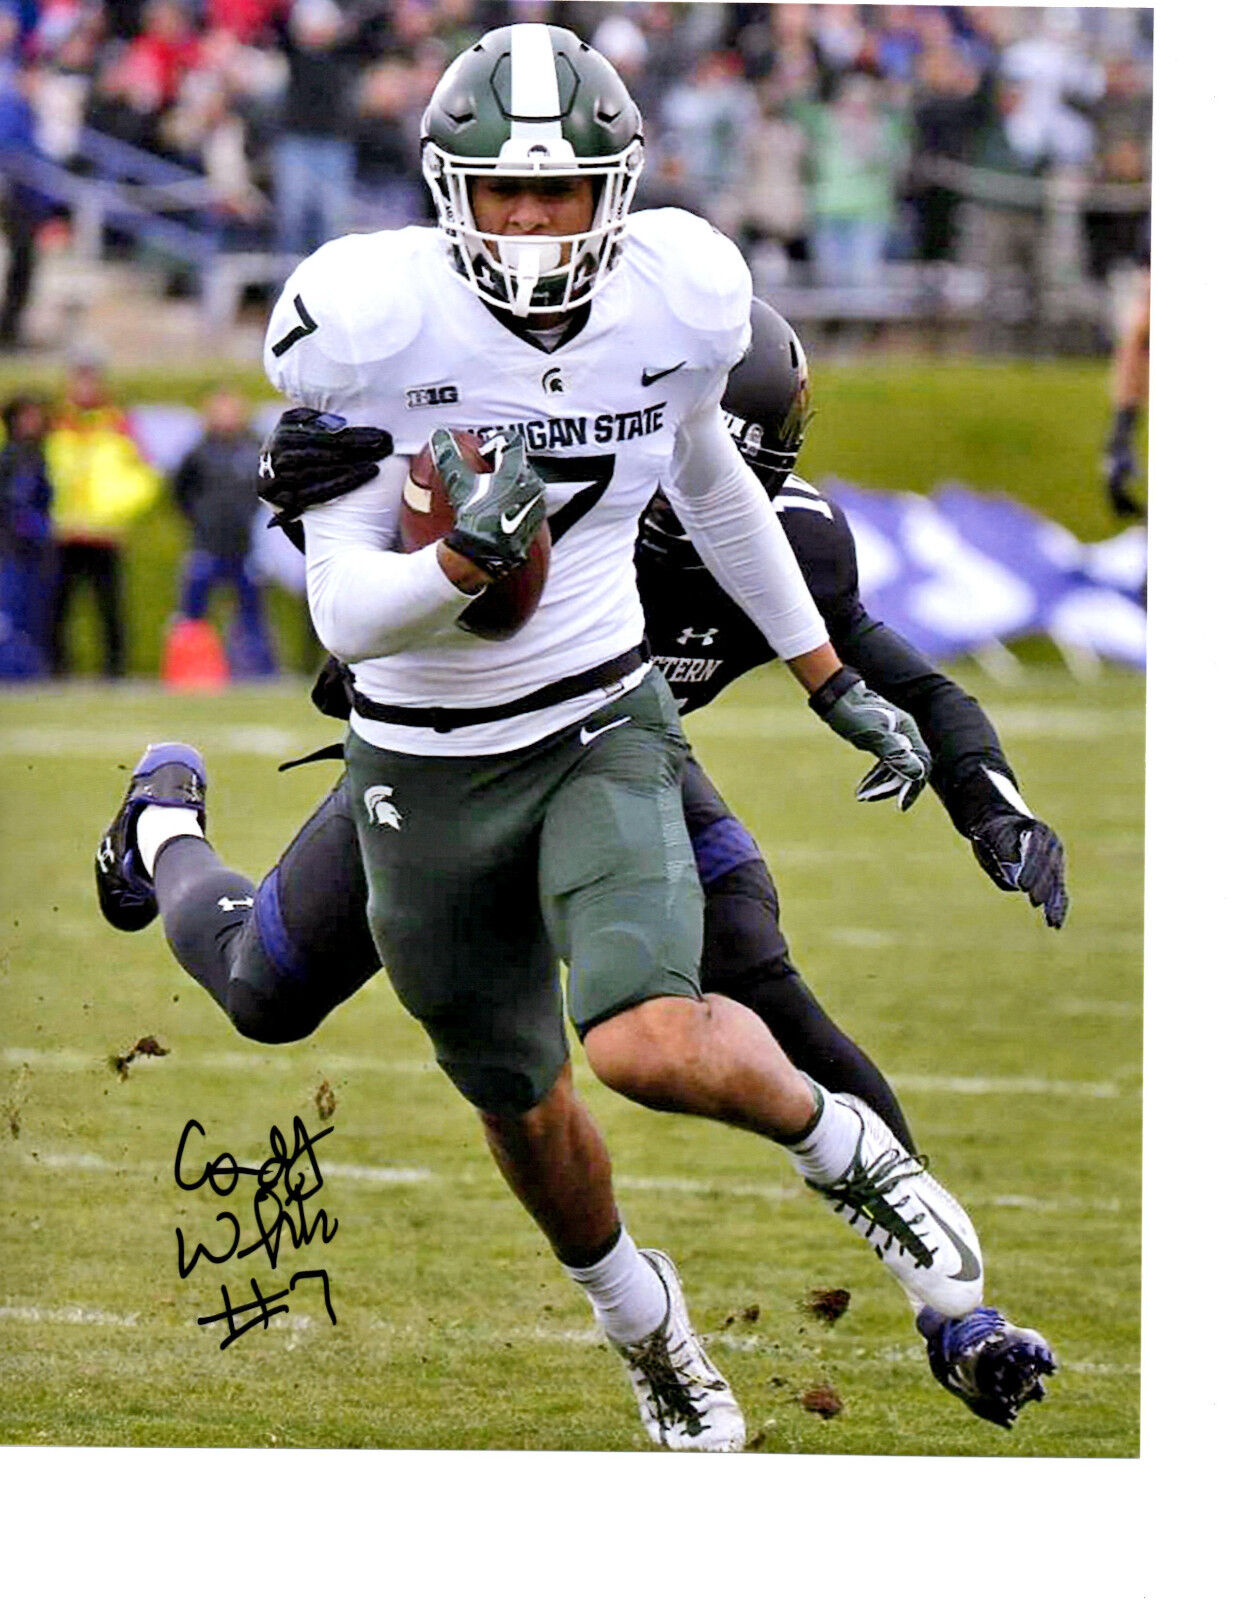 Cody White signed autographed 8x10 Photo Poster painting Michigan State Spartans foootball MSU d